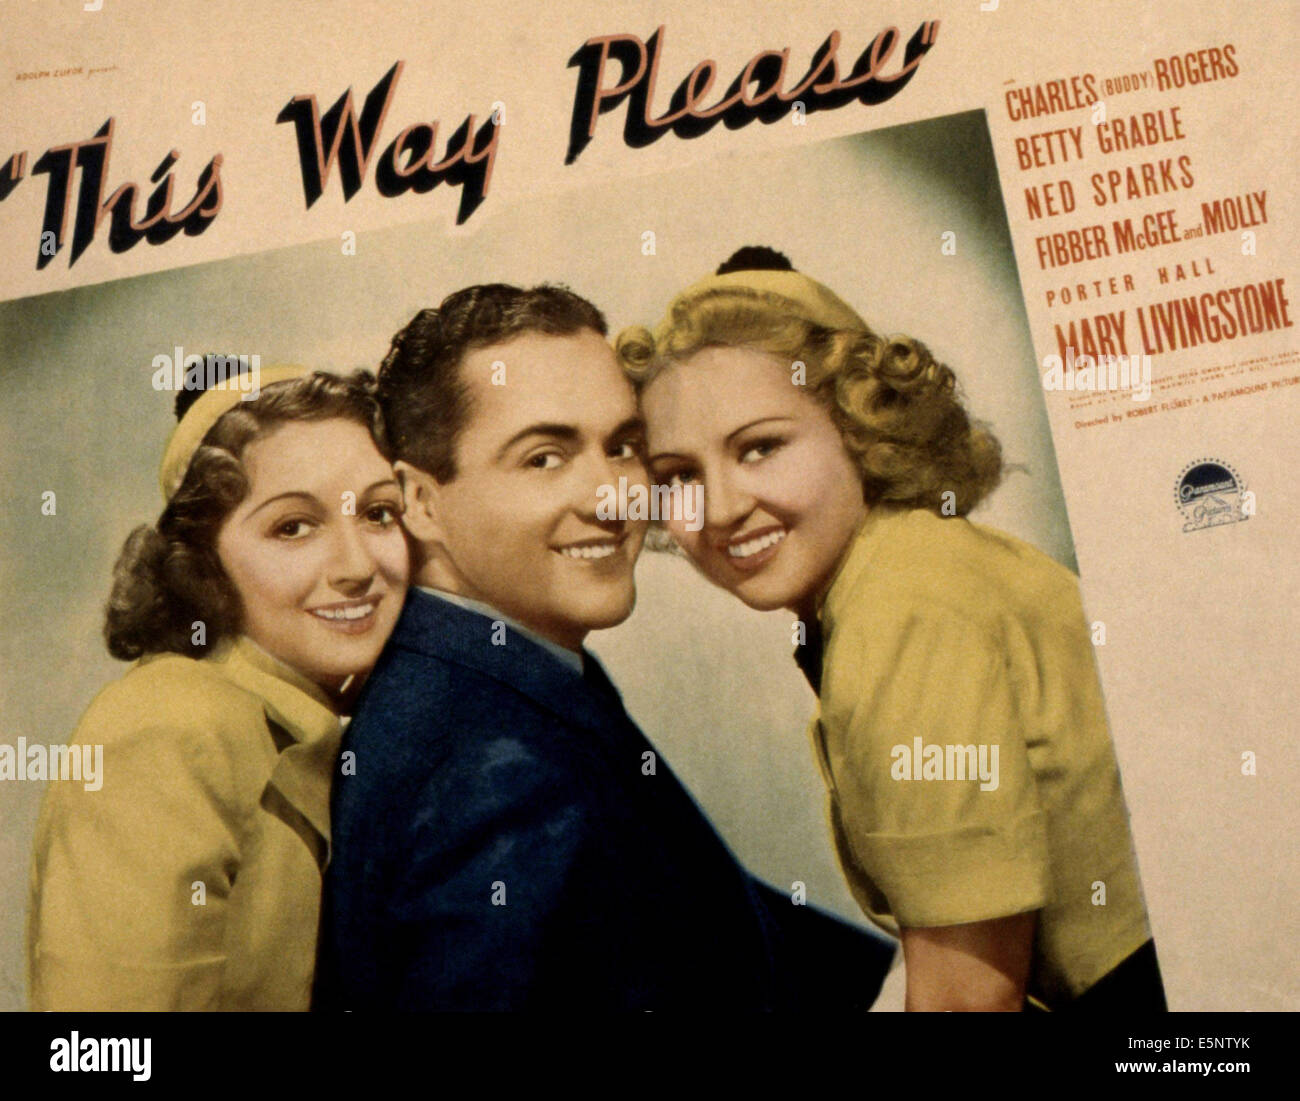 THIS WAY PLEASE, Mary Livingstone, Charles 'Buddy' Rogers, Betty Grable, 1937 Stock Photo